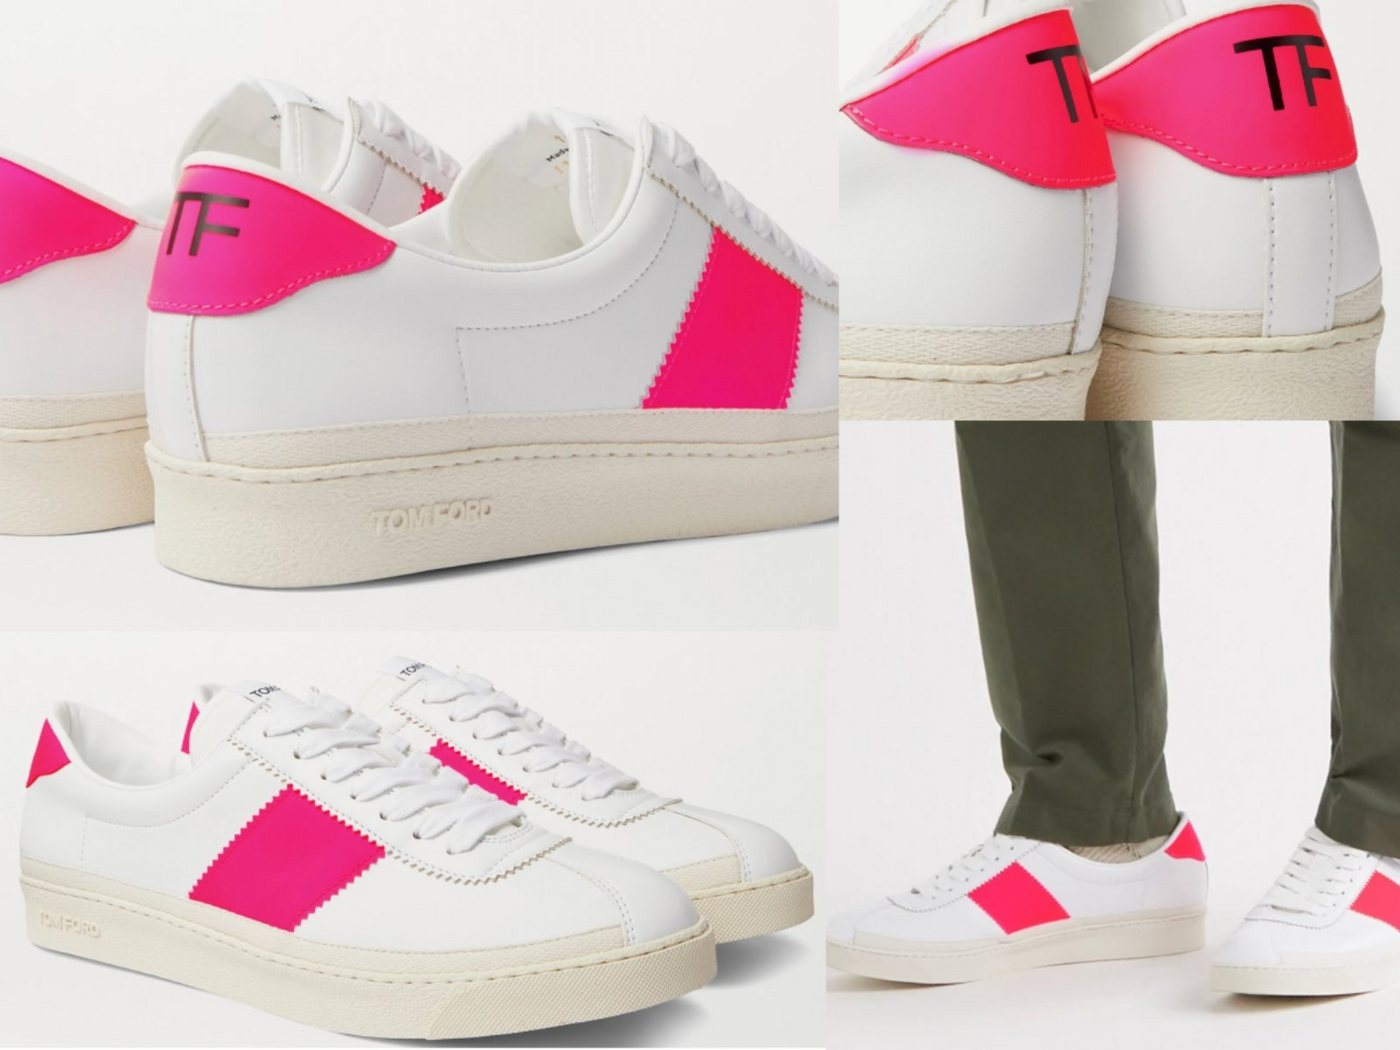 Tom Ford TOM FORD Bannister Pink Sneakers Schuhe Shoes Trainers Turnschuhe Trai Sneaker von Tom Ford